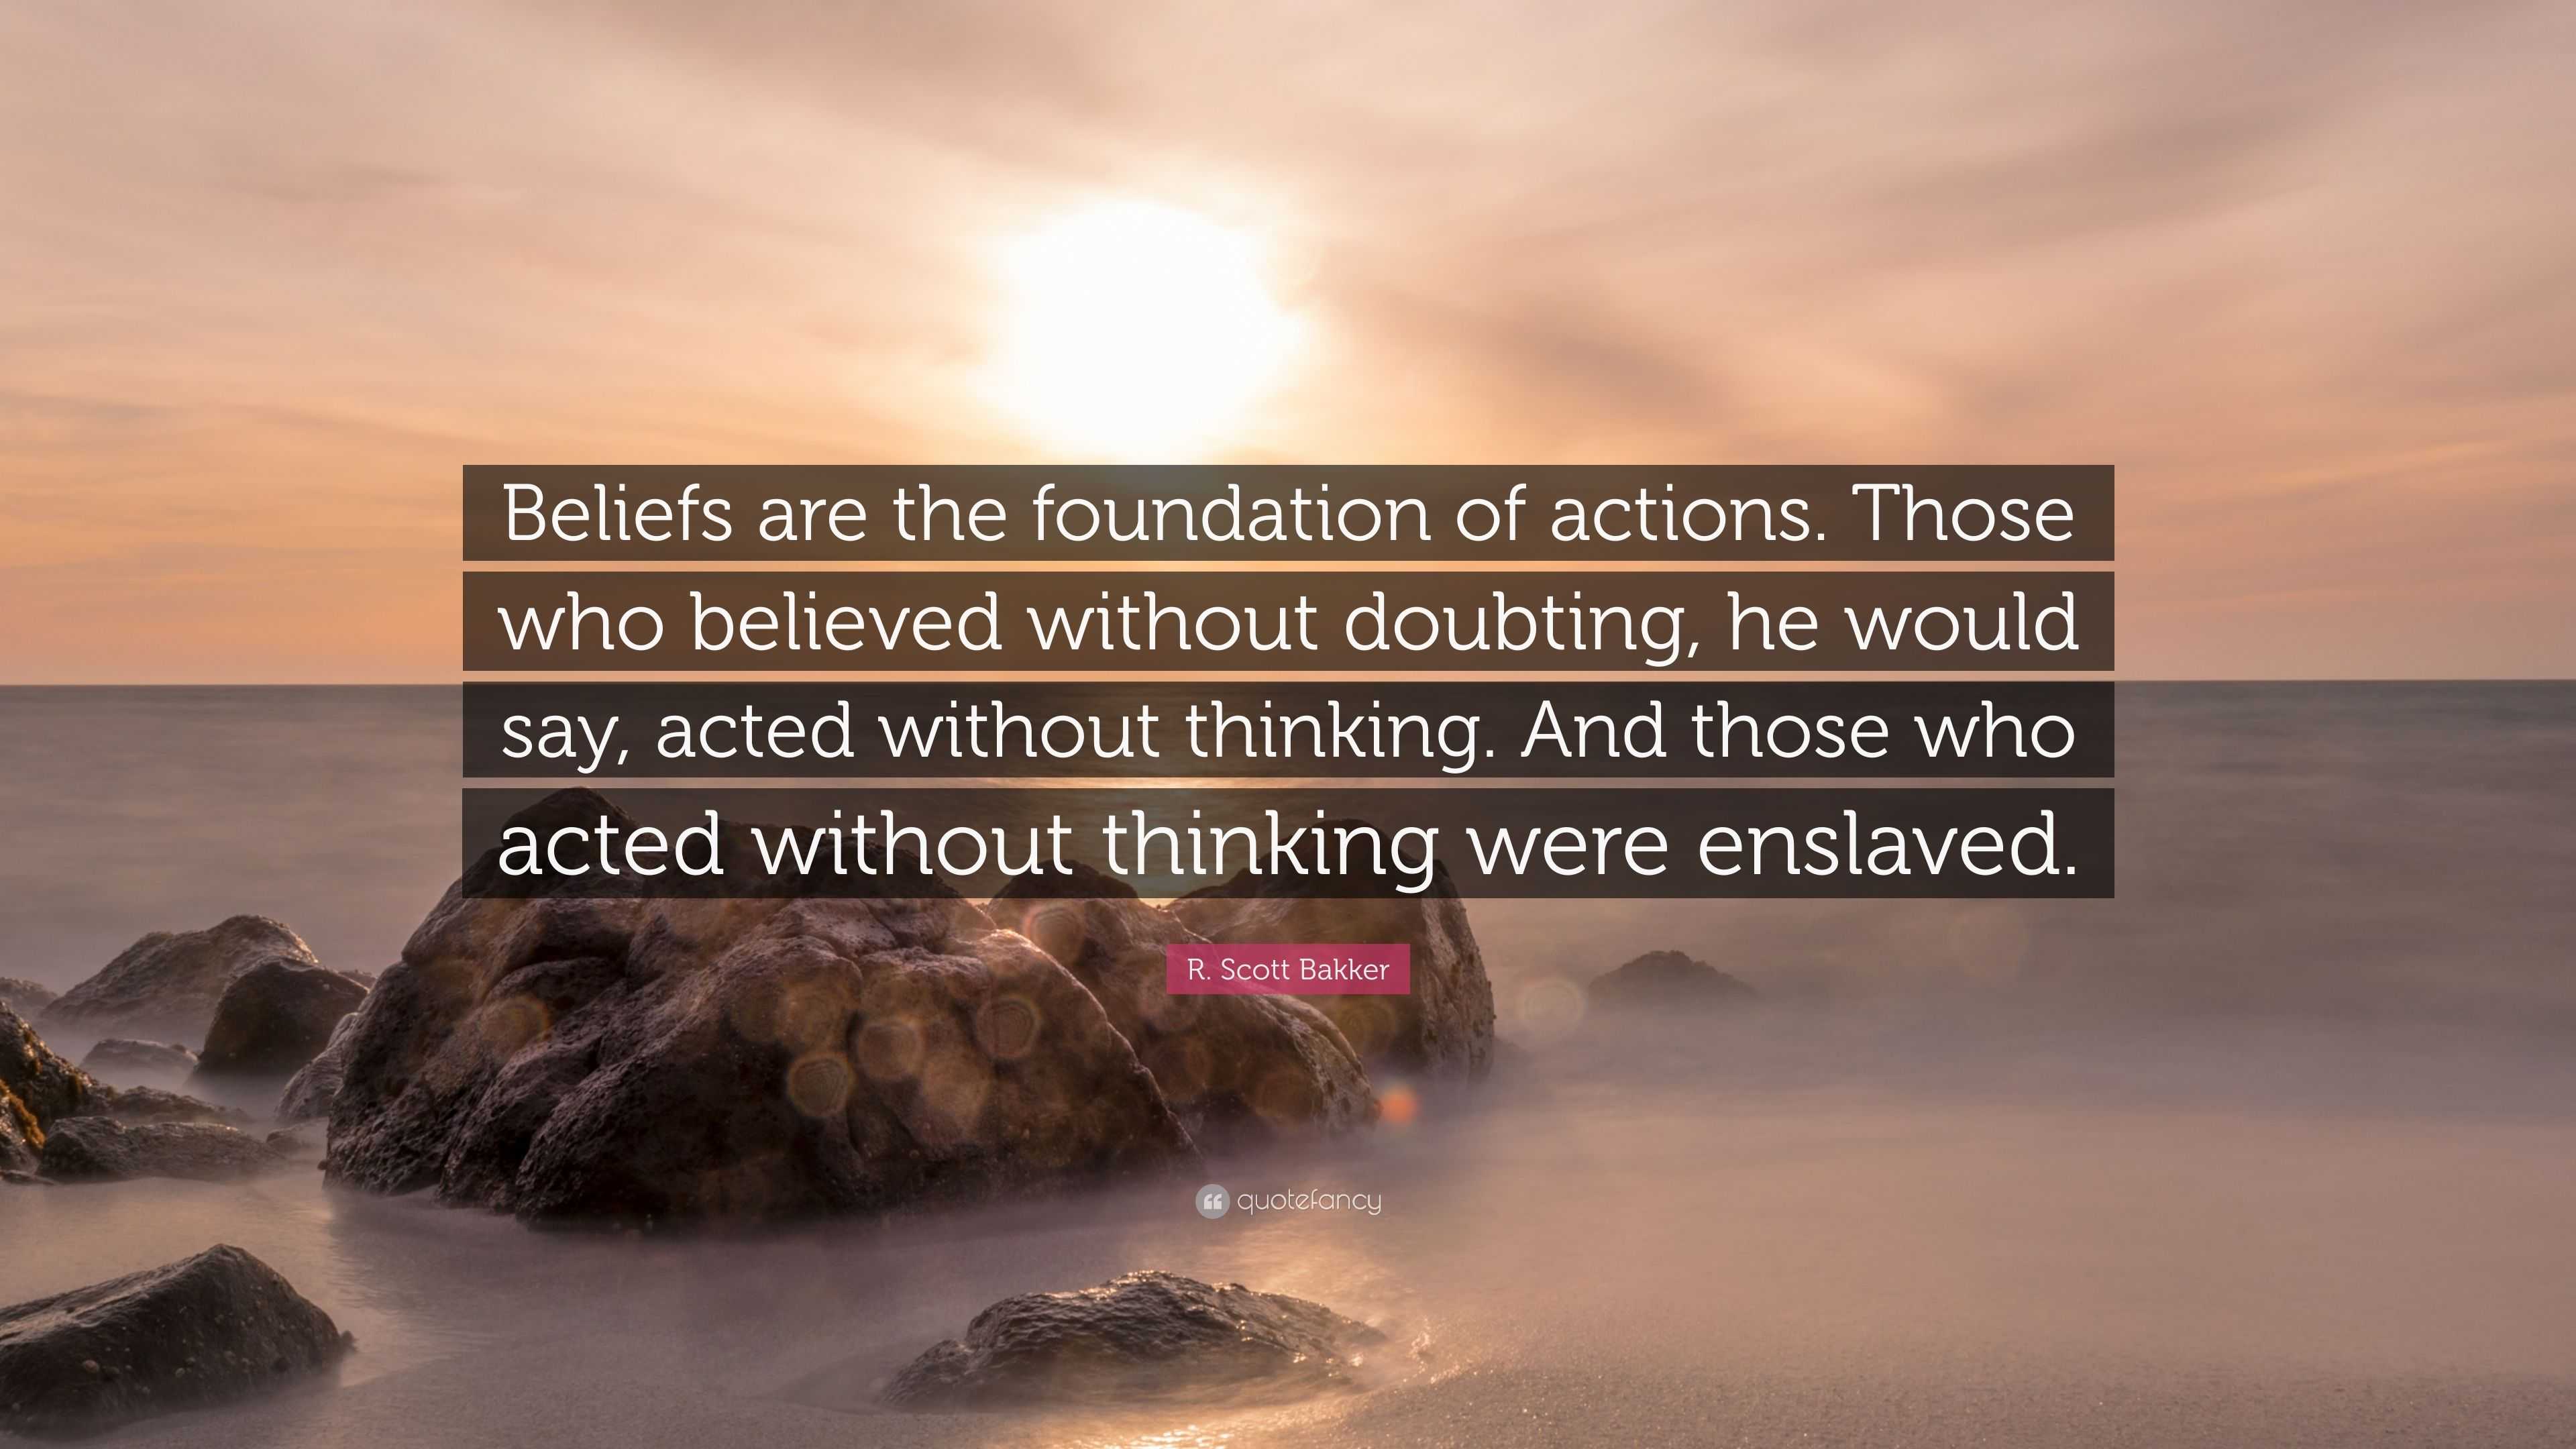 R. Scott Bakker Quote: “Beliefs are the foundation of actions. Those ...